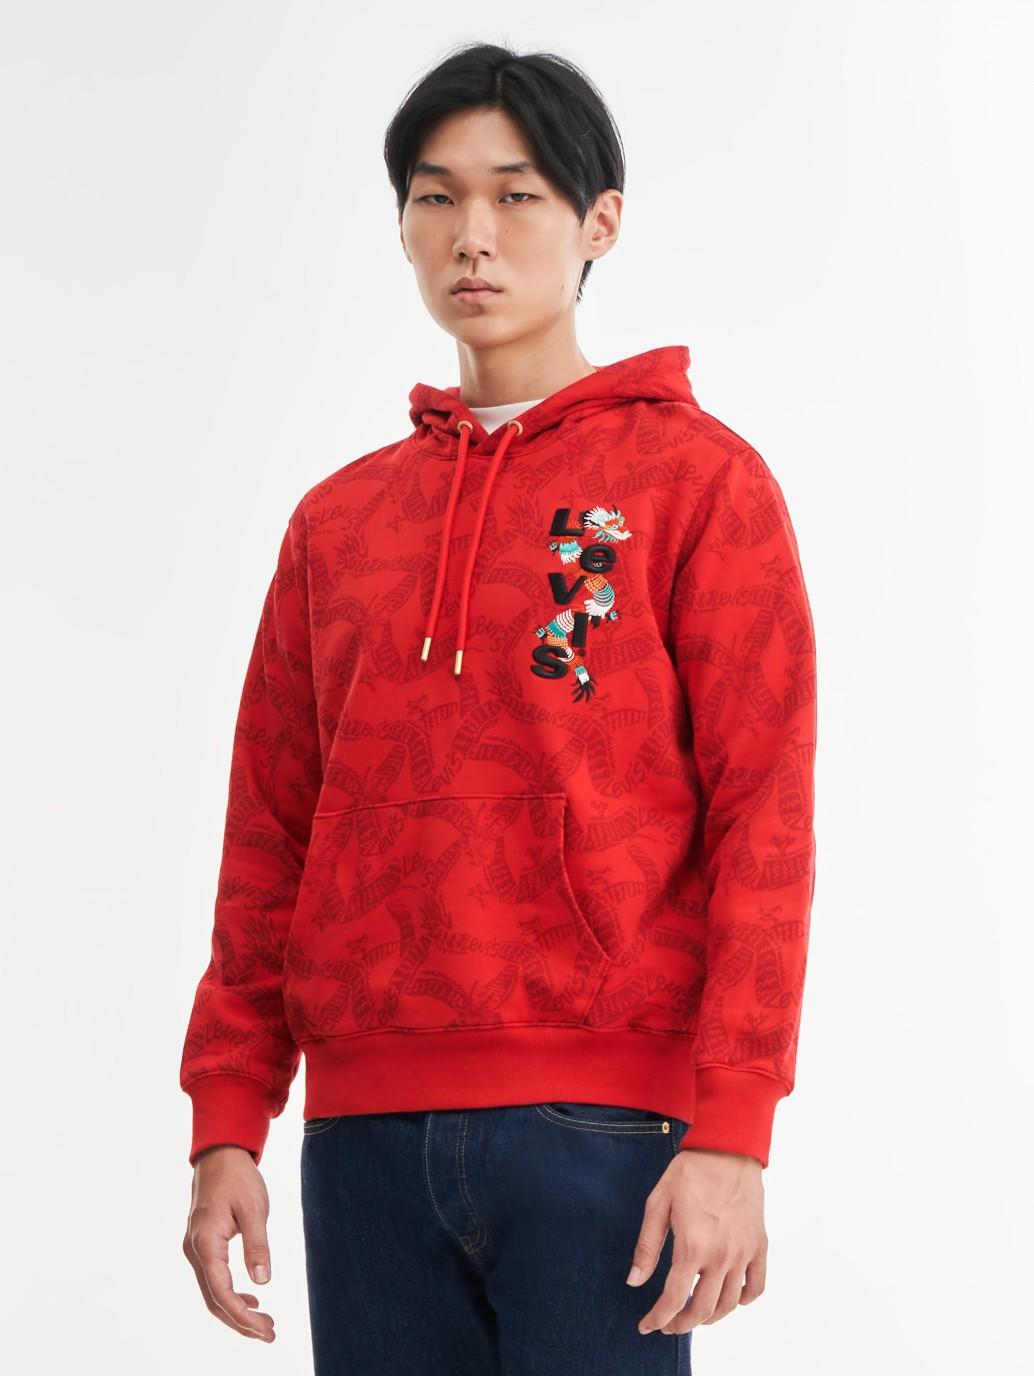 Buy Levi's® Lunar New Year Men's Hoodie| Levi’s® Official Online Store SG